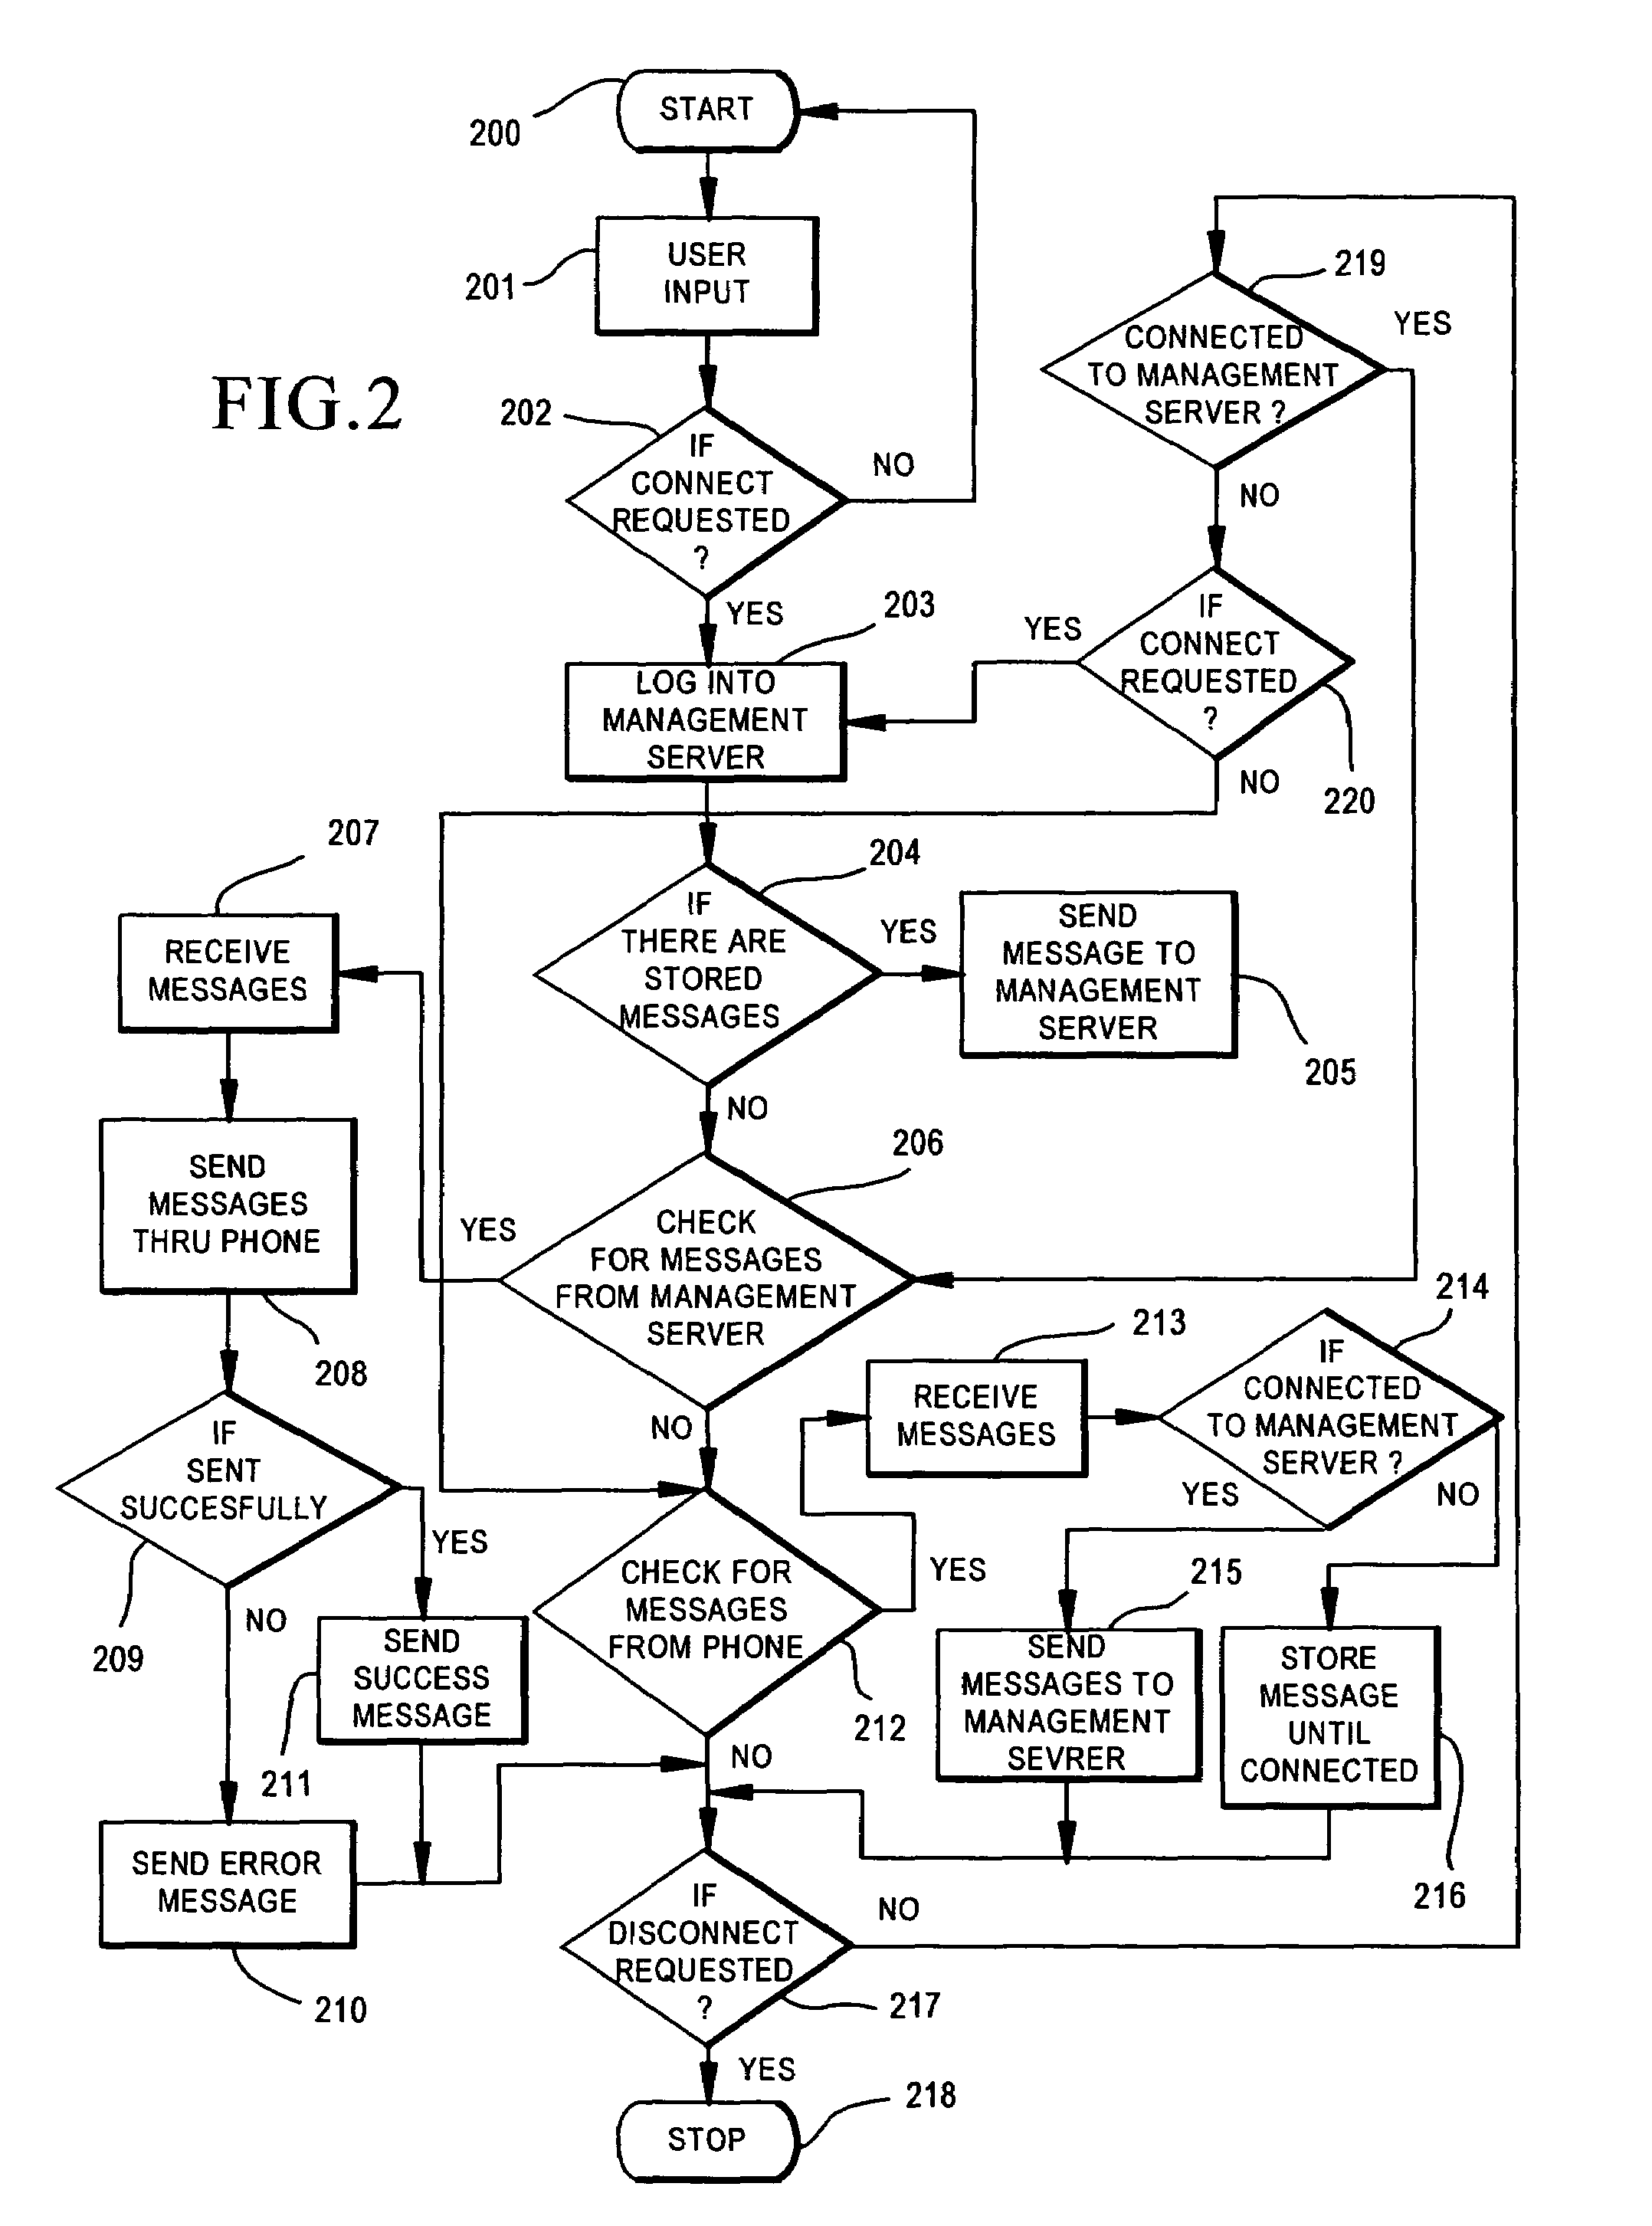 System and method for sending SMS and text messages